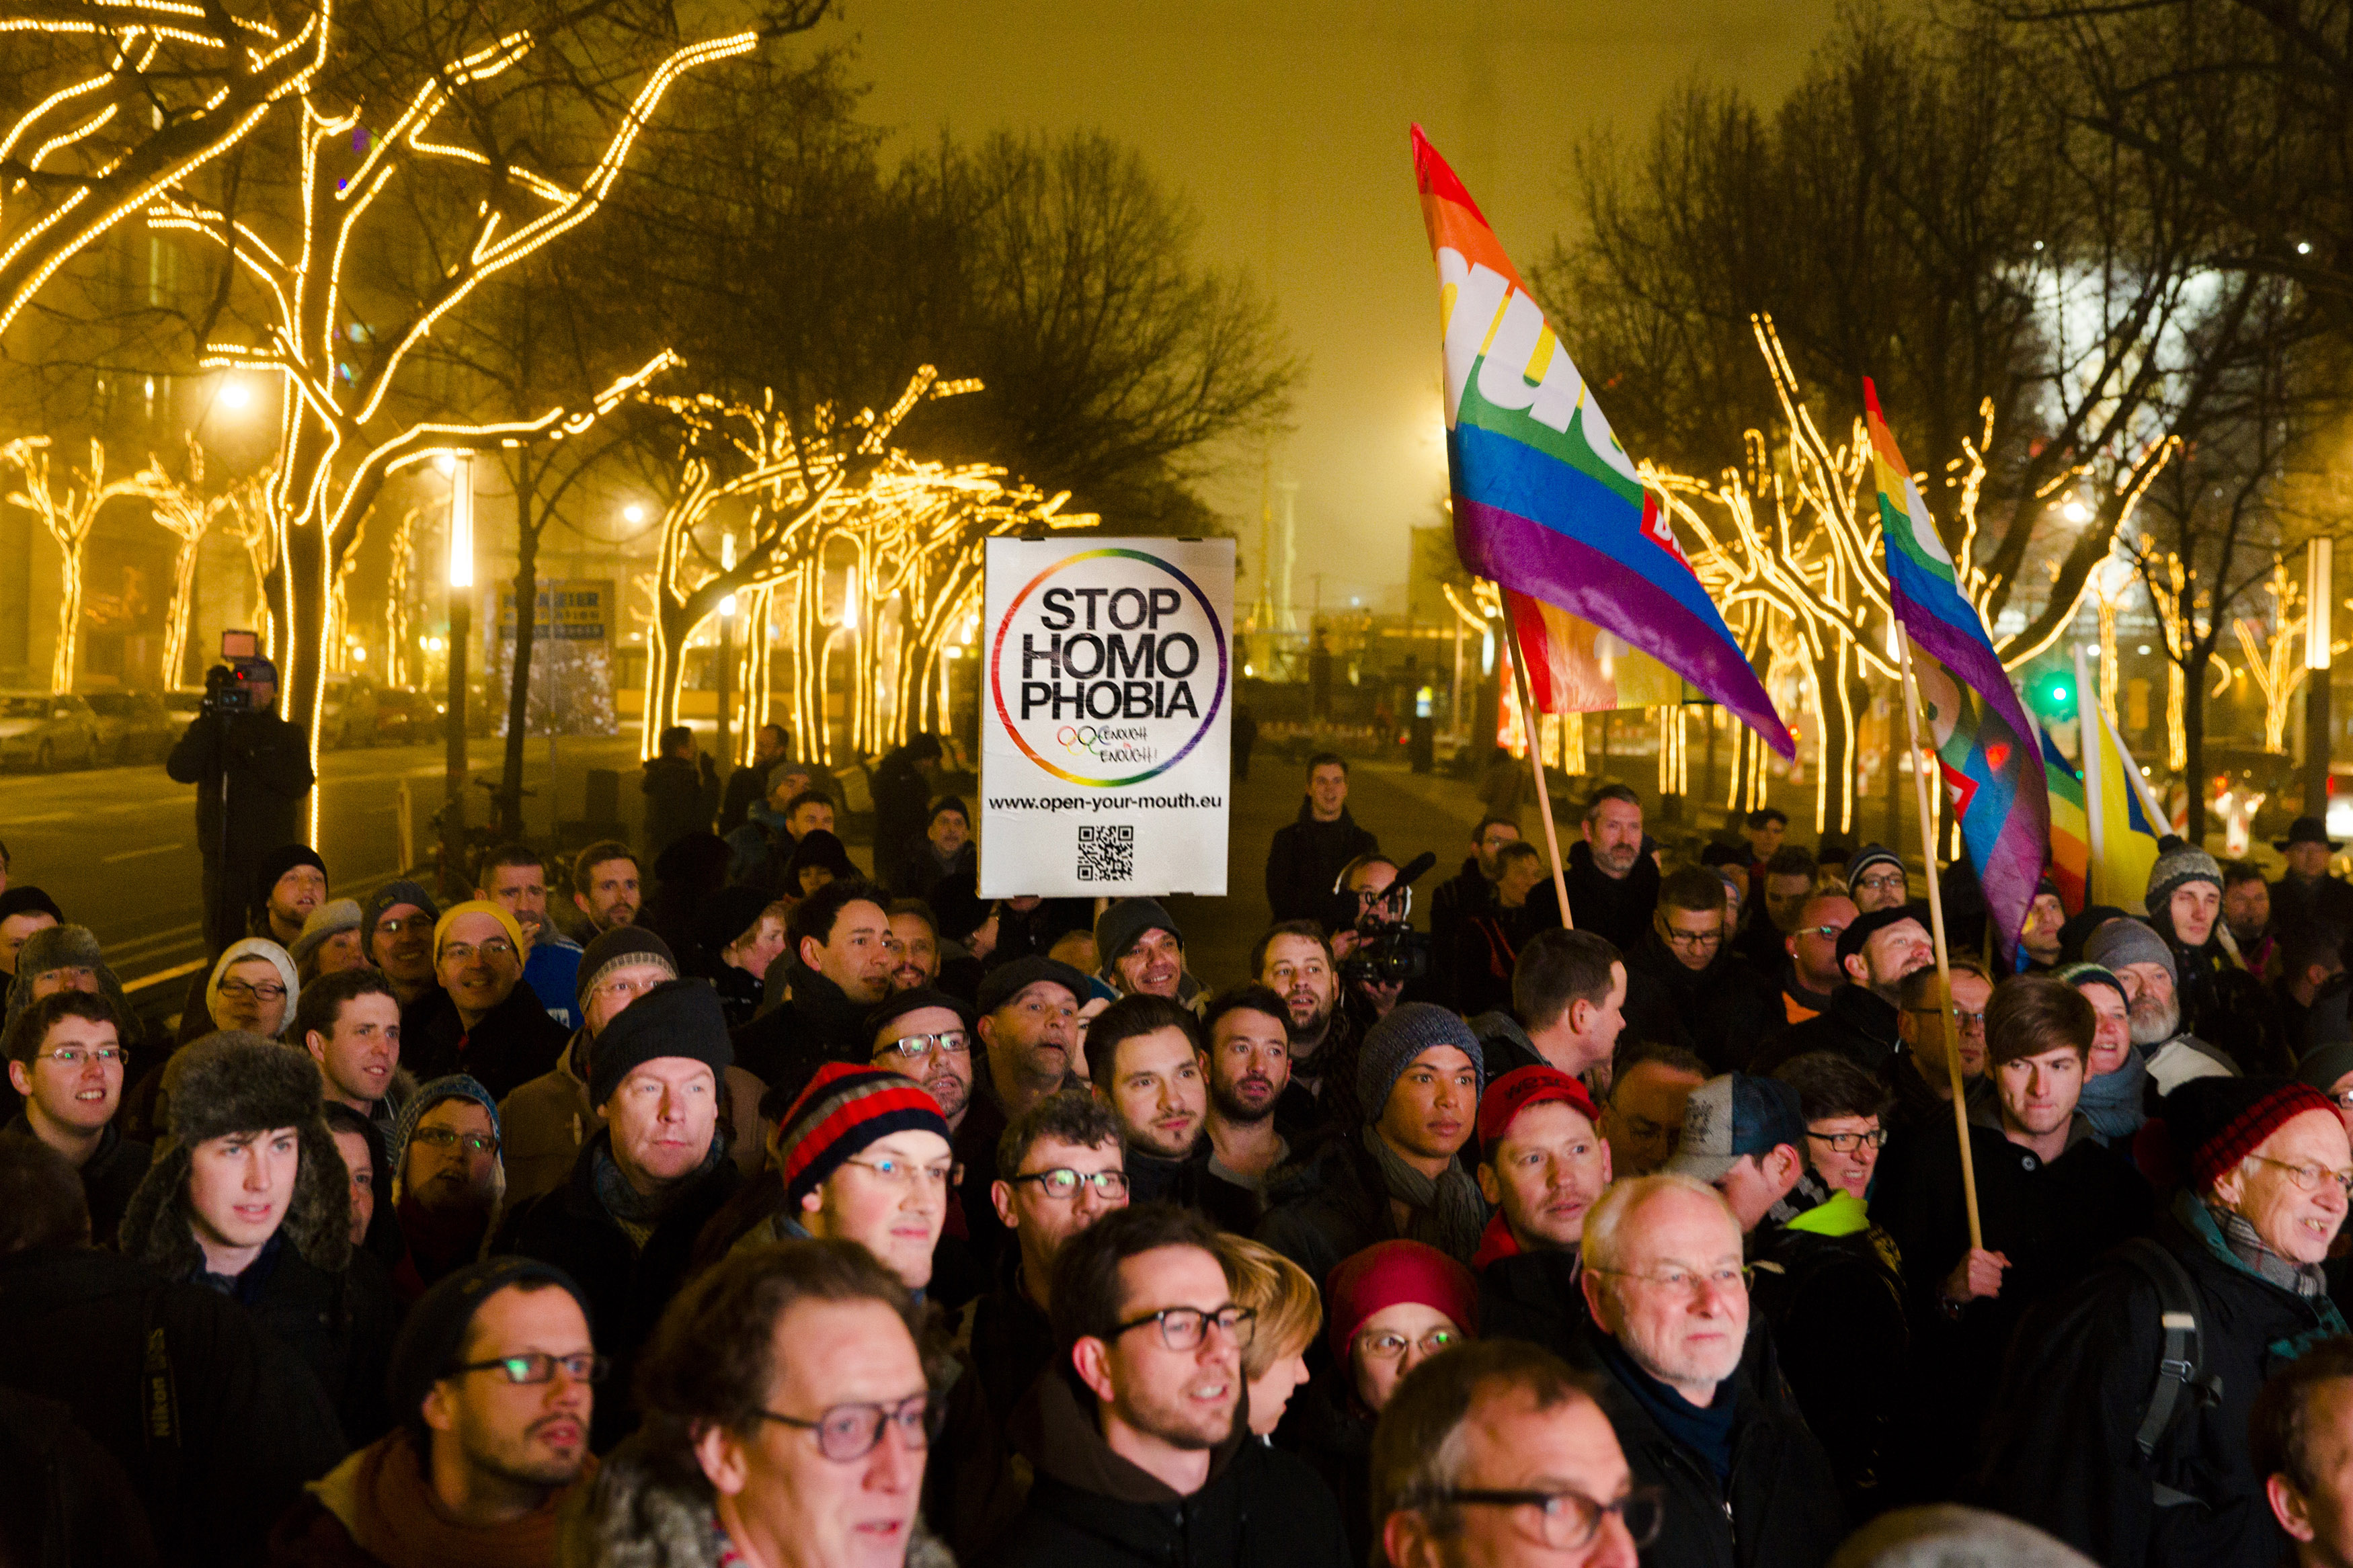 12 December 2013, Germany. Protestors call on the Russian authorities to lift anti-LGBT laws outside the Russian embassy in Berlin.